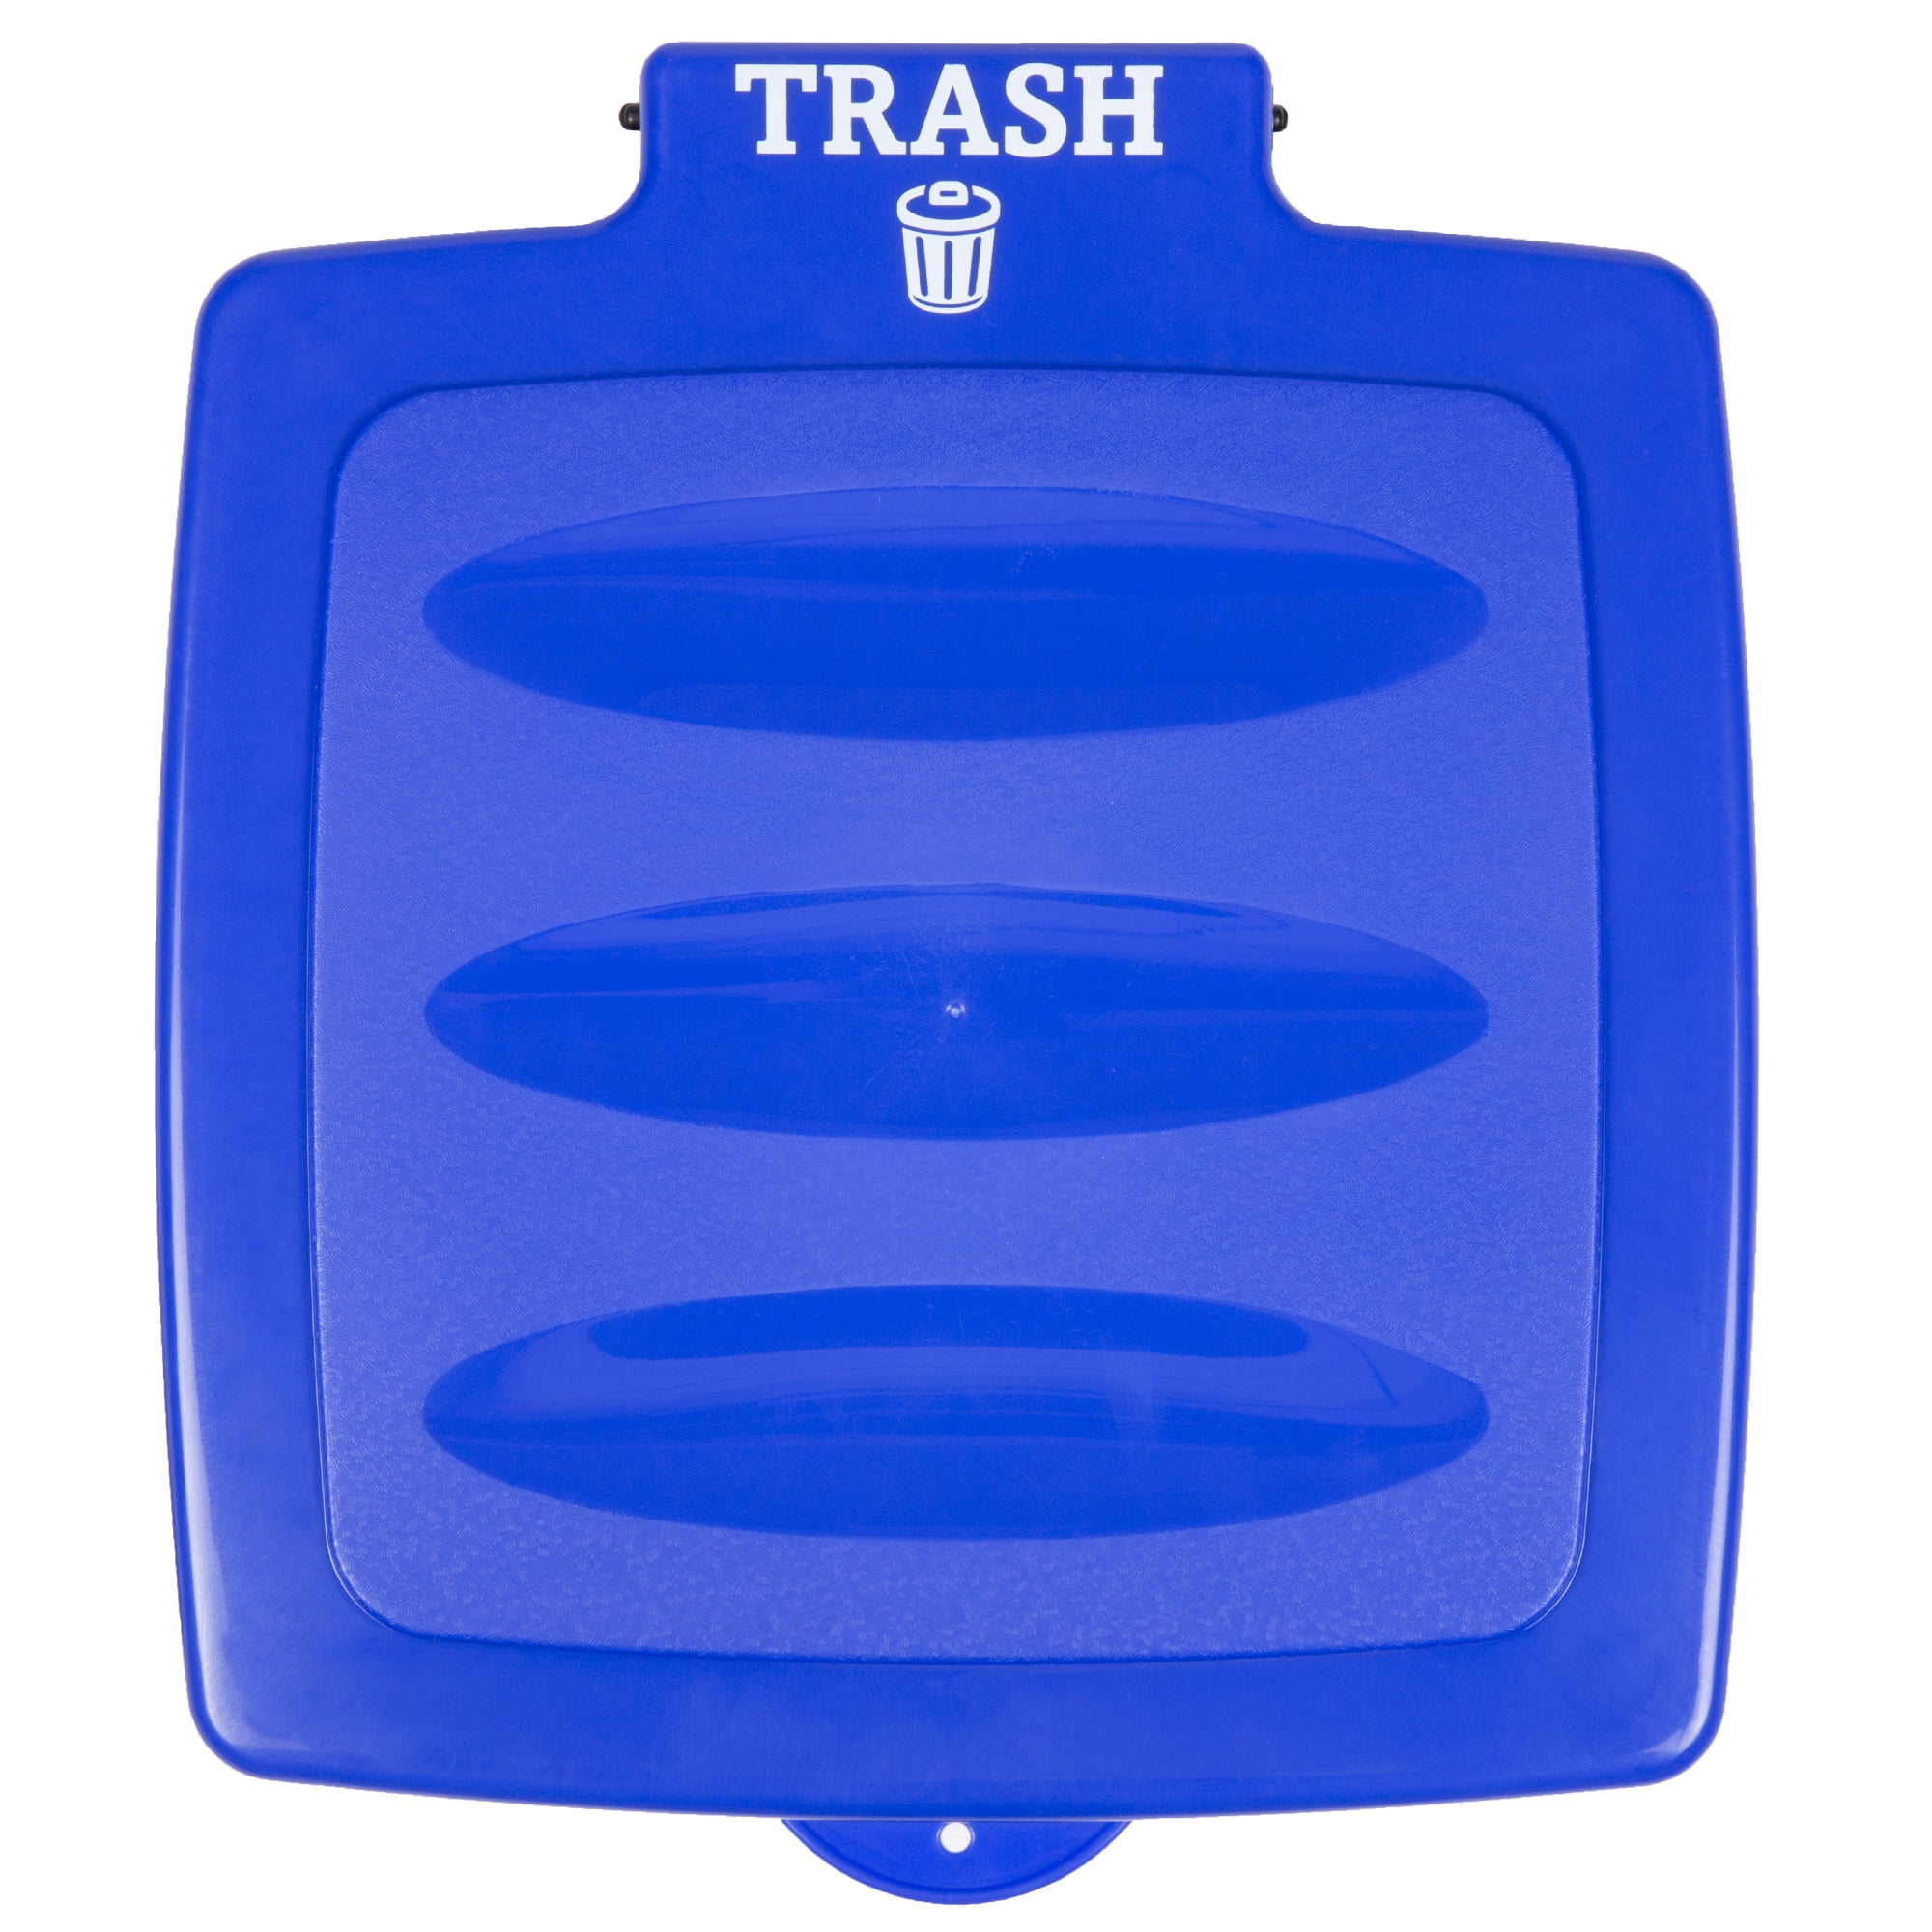 Blue Collapsible Trashcan for Garbage and Indoor//Outdoor Portable Trash Bag Holder